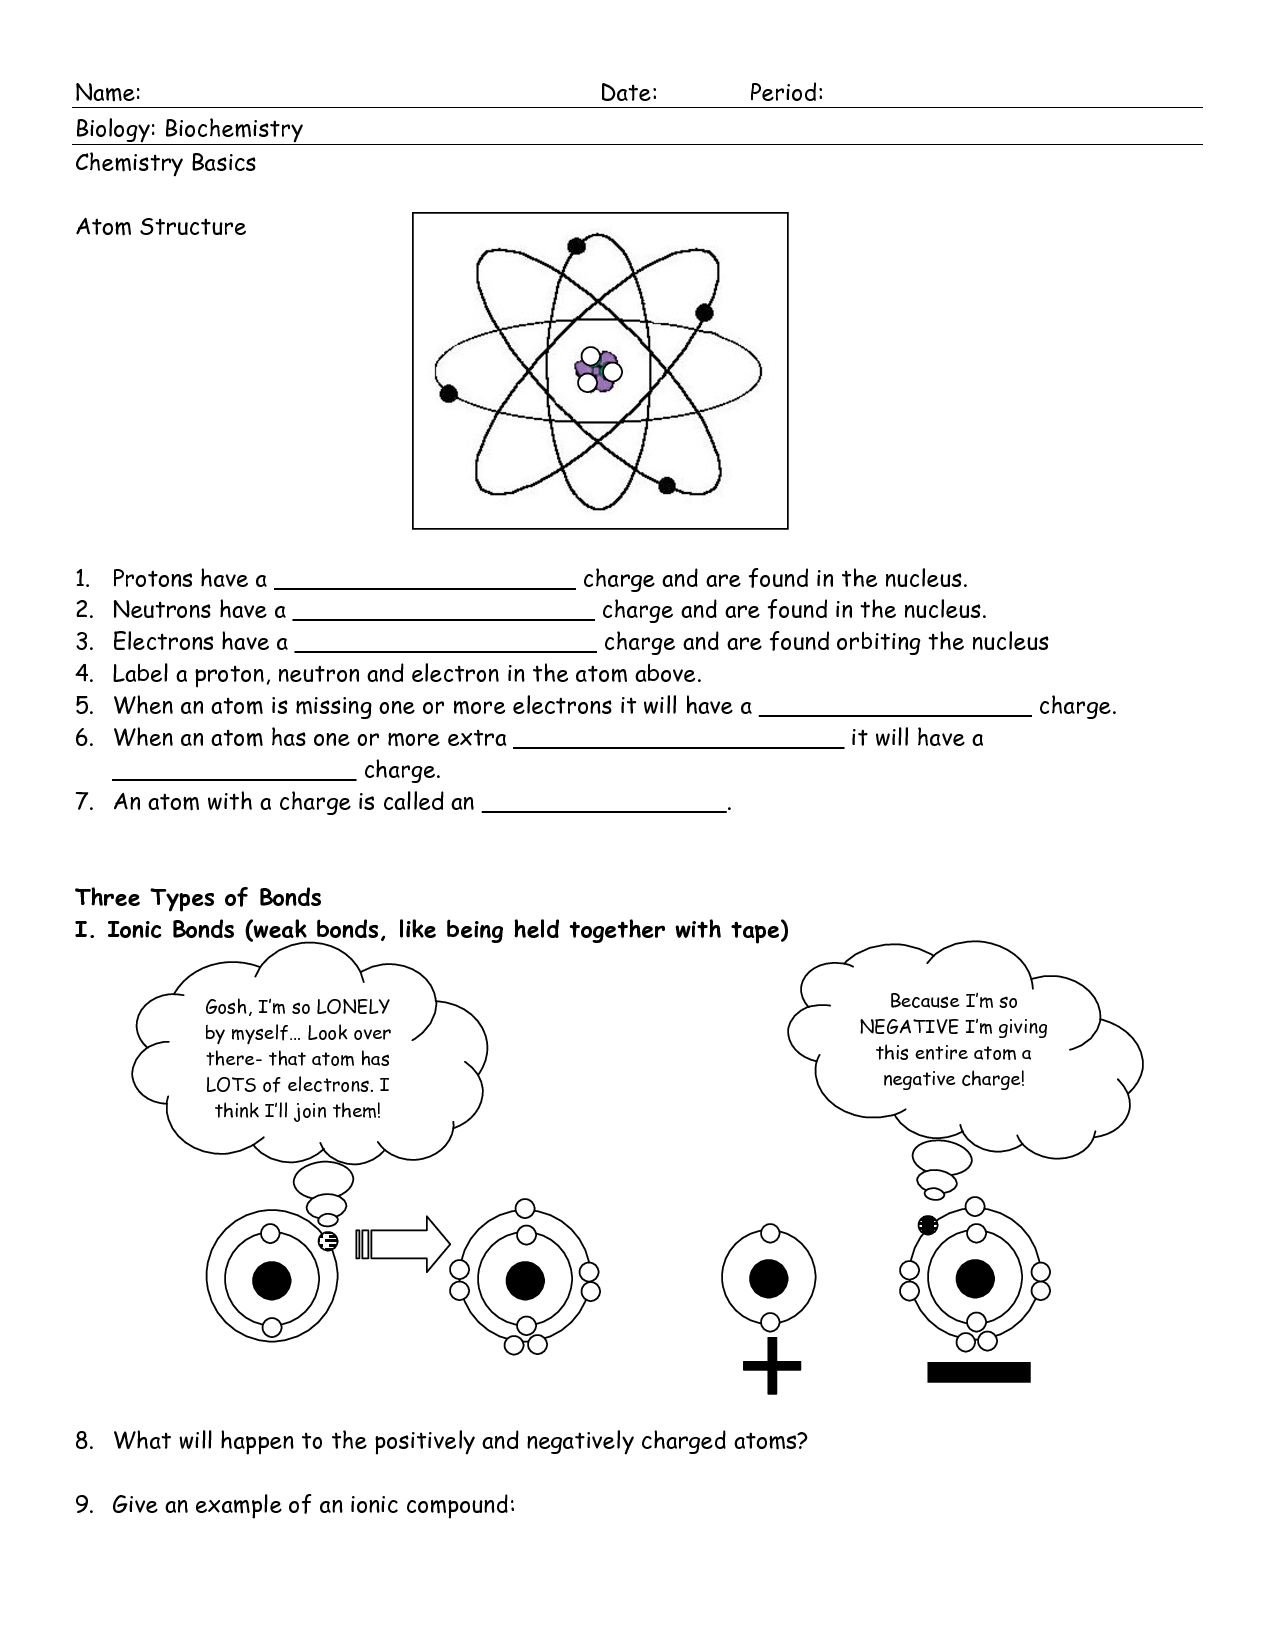 atomic-structure-p155-atomic-structure-p155-jpg-chemistry-worksheets-text-features